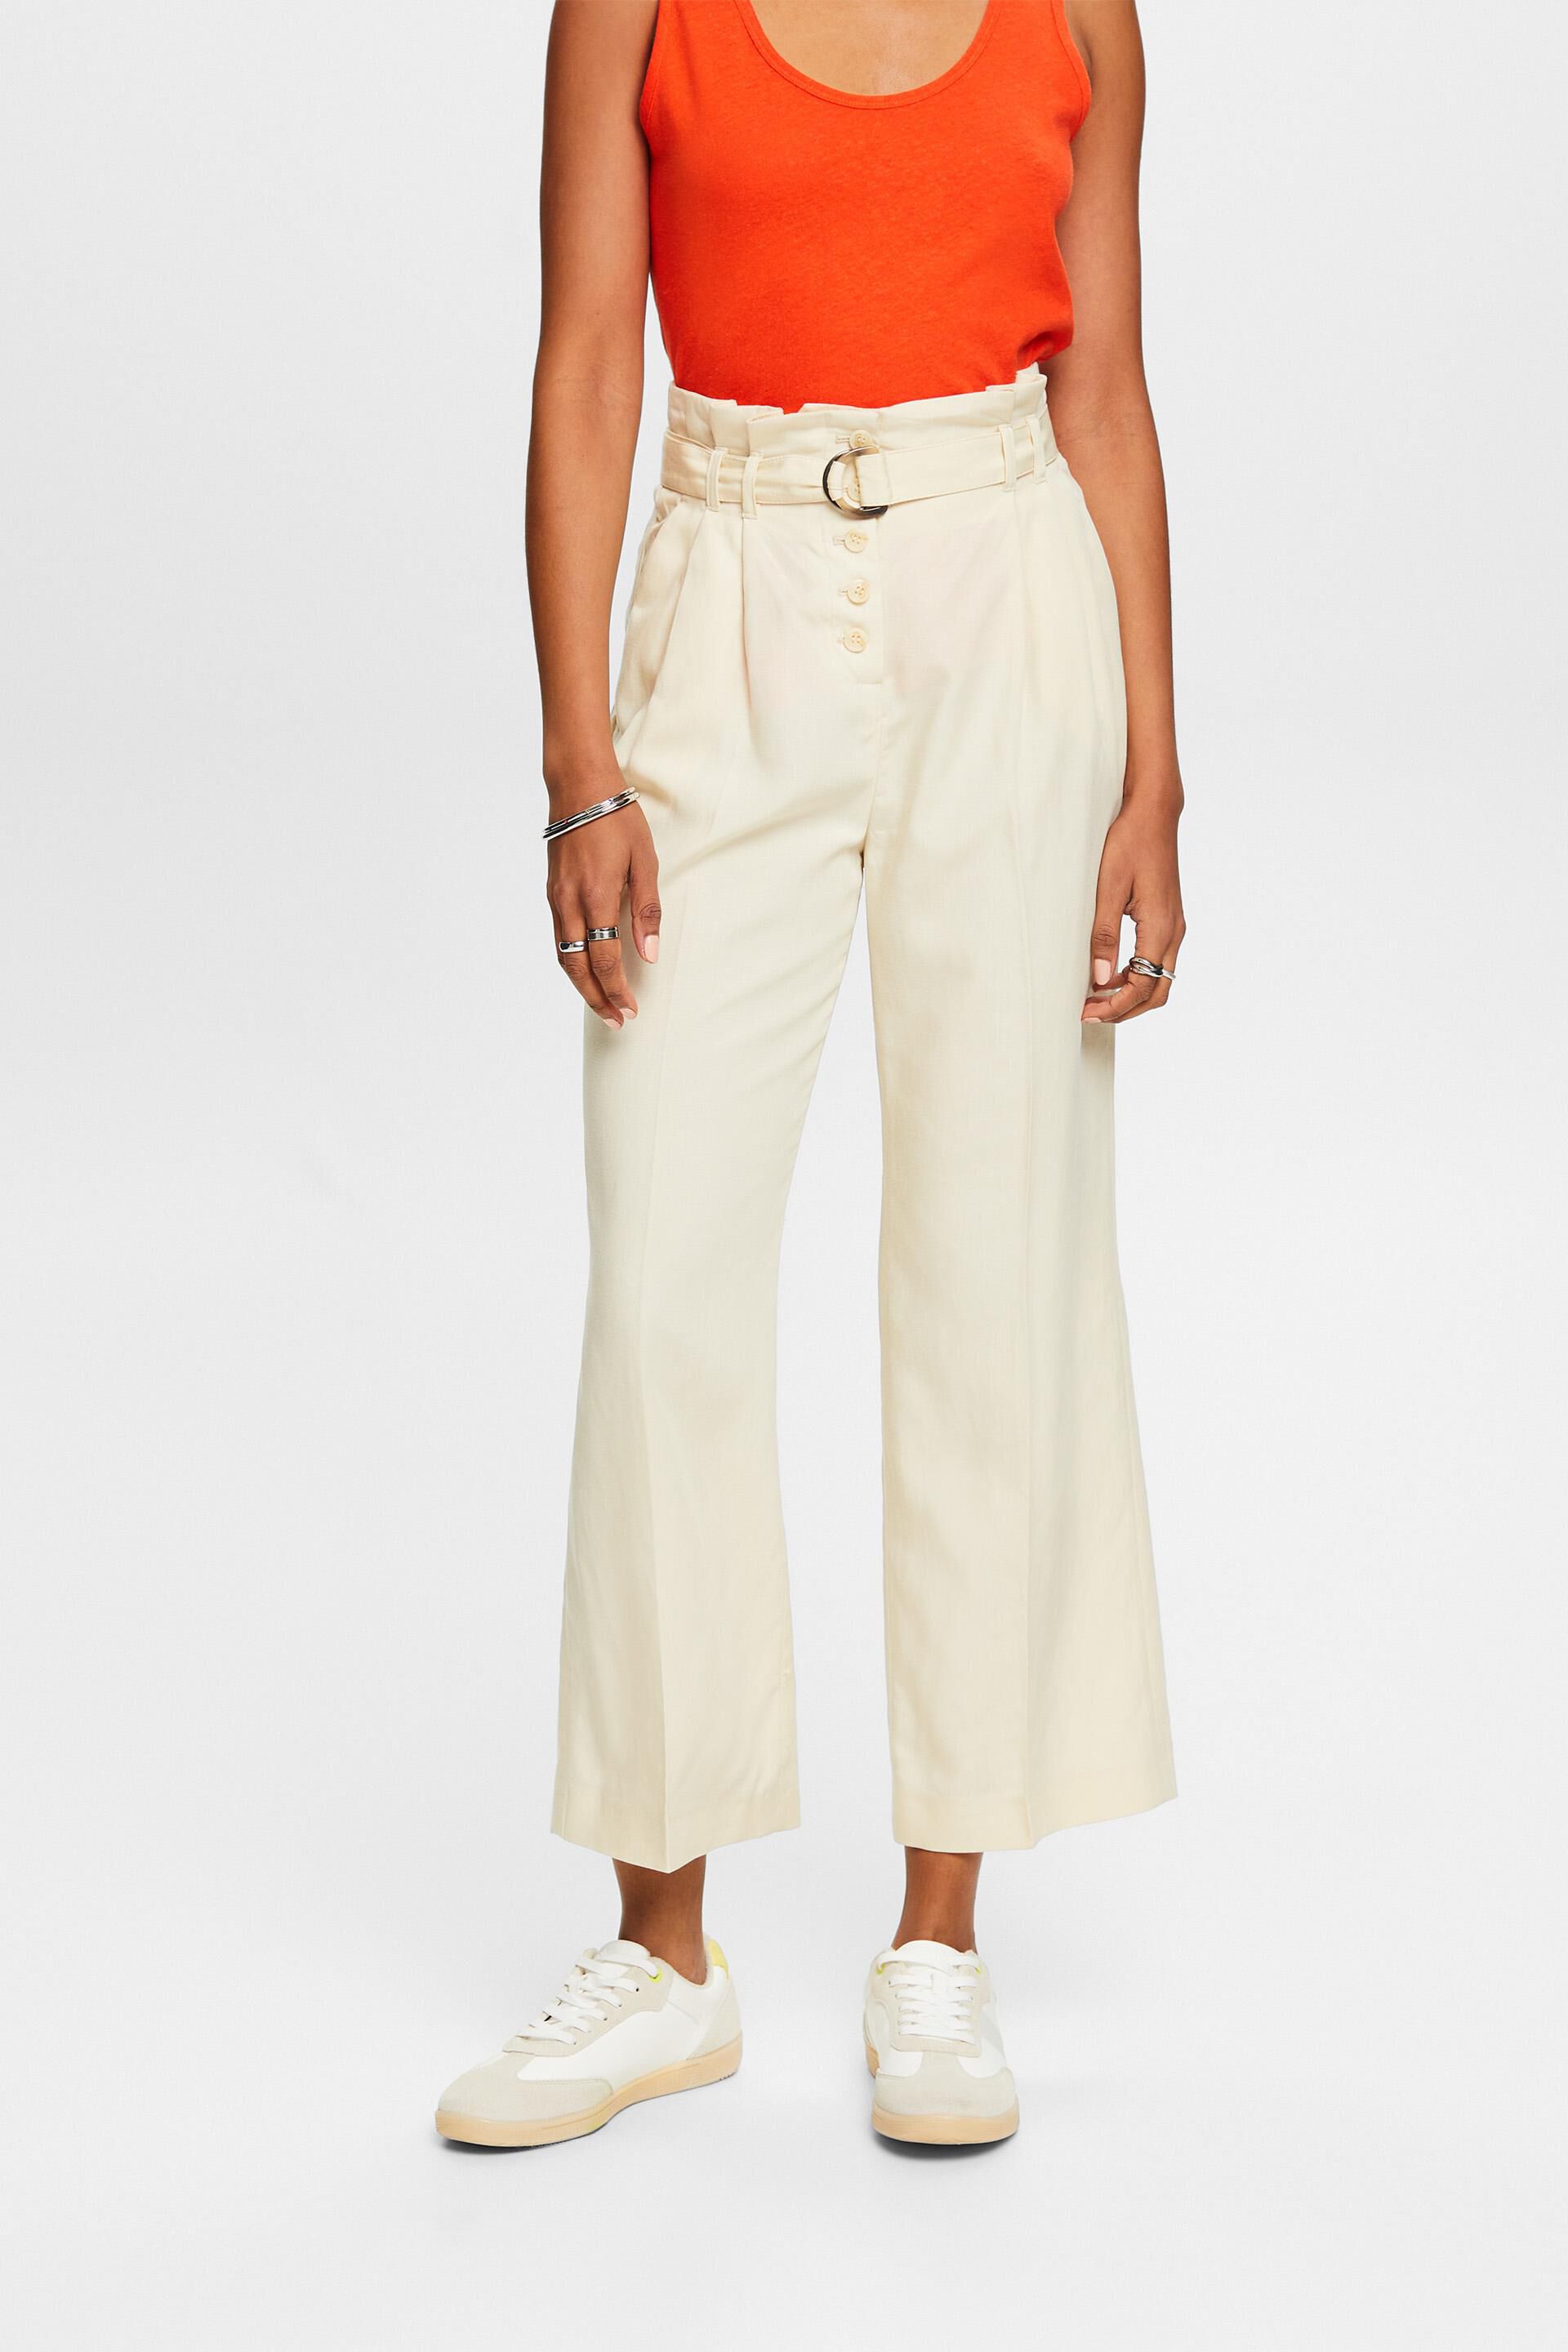 Bruin Cropped culotte met hoge taille voor mix & match